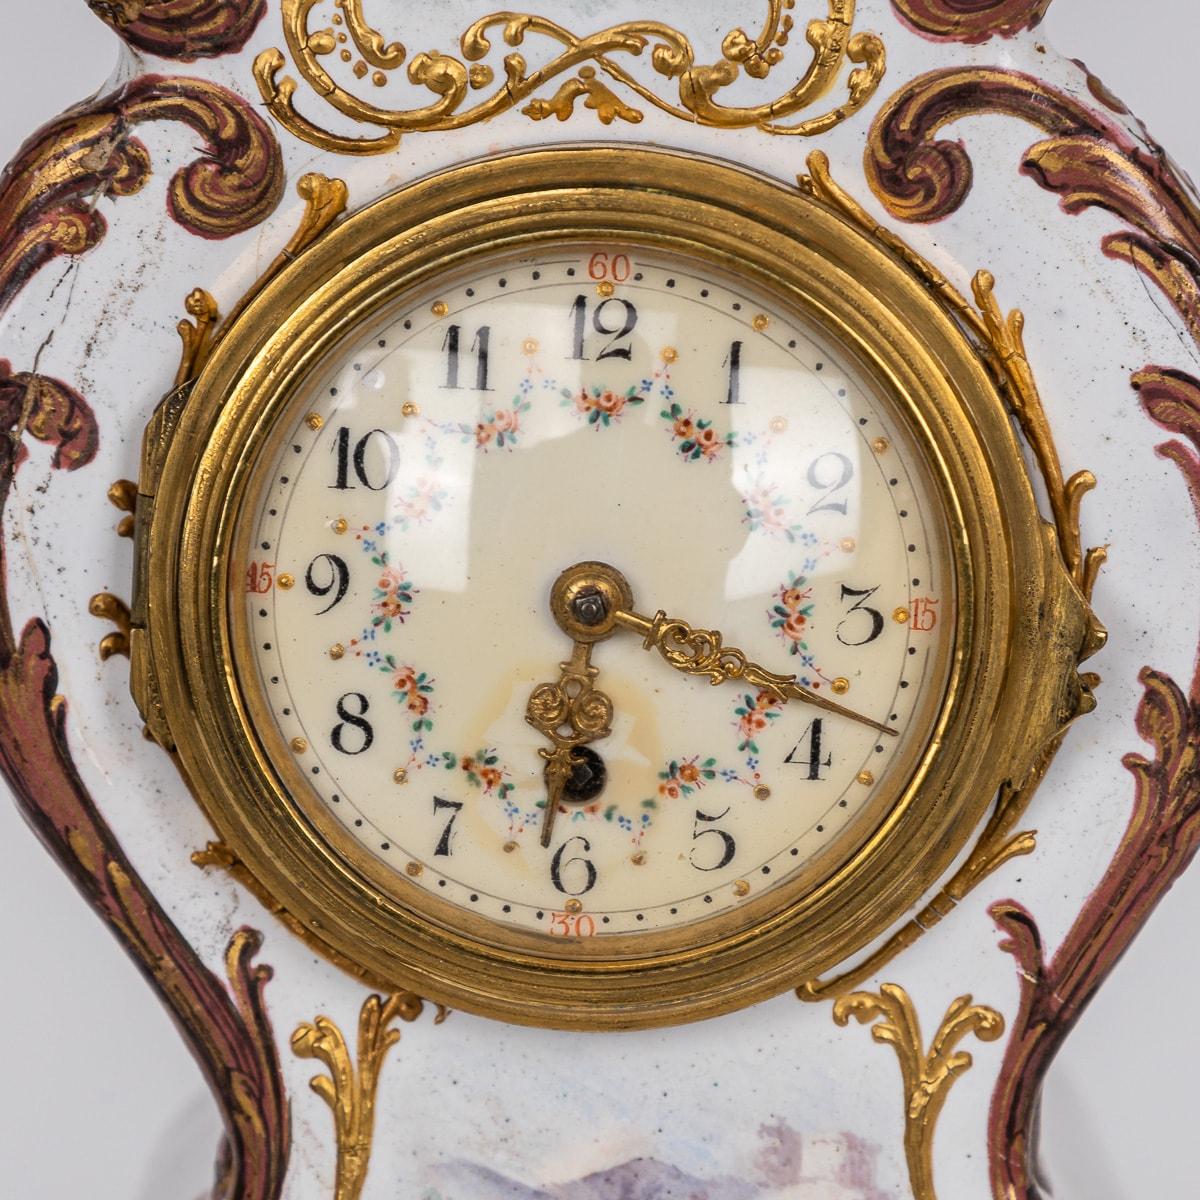 18th Century English Enamel Table Clock With Floral & Romantic Scenes c.1770 For Sale 3